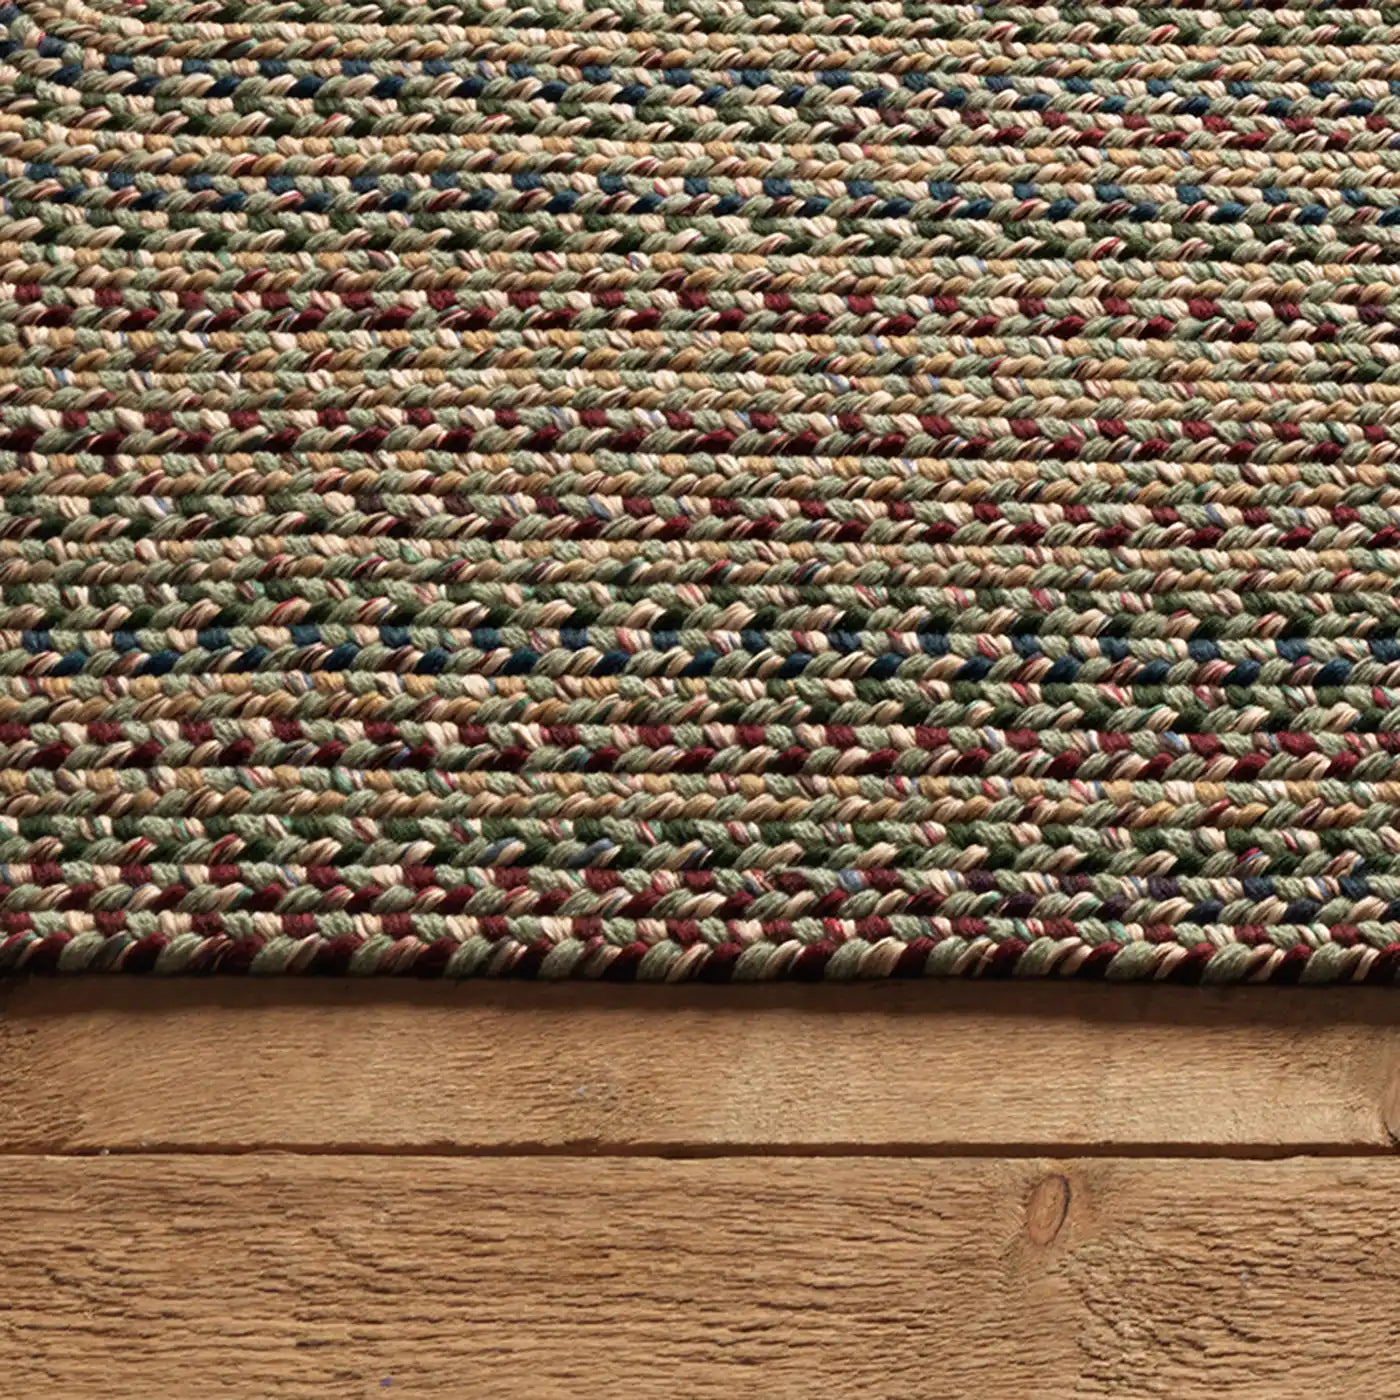 Colonial Mills Worley Natural Handcraft Braided Runner Rug in Braided & Farmhouse/Rustic style.